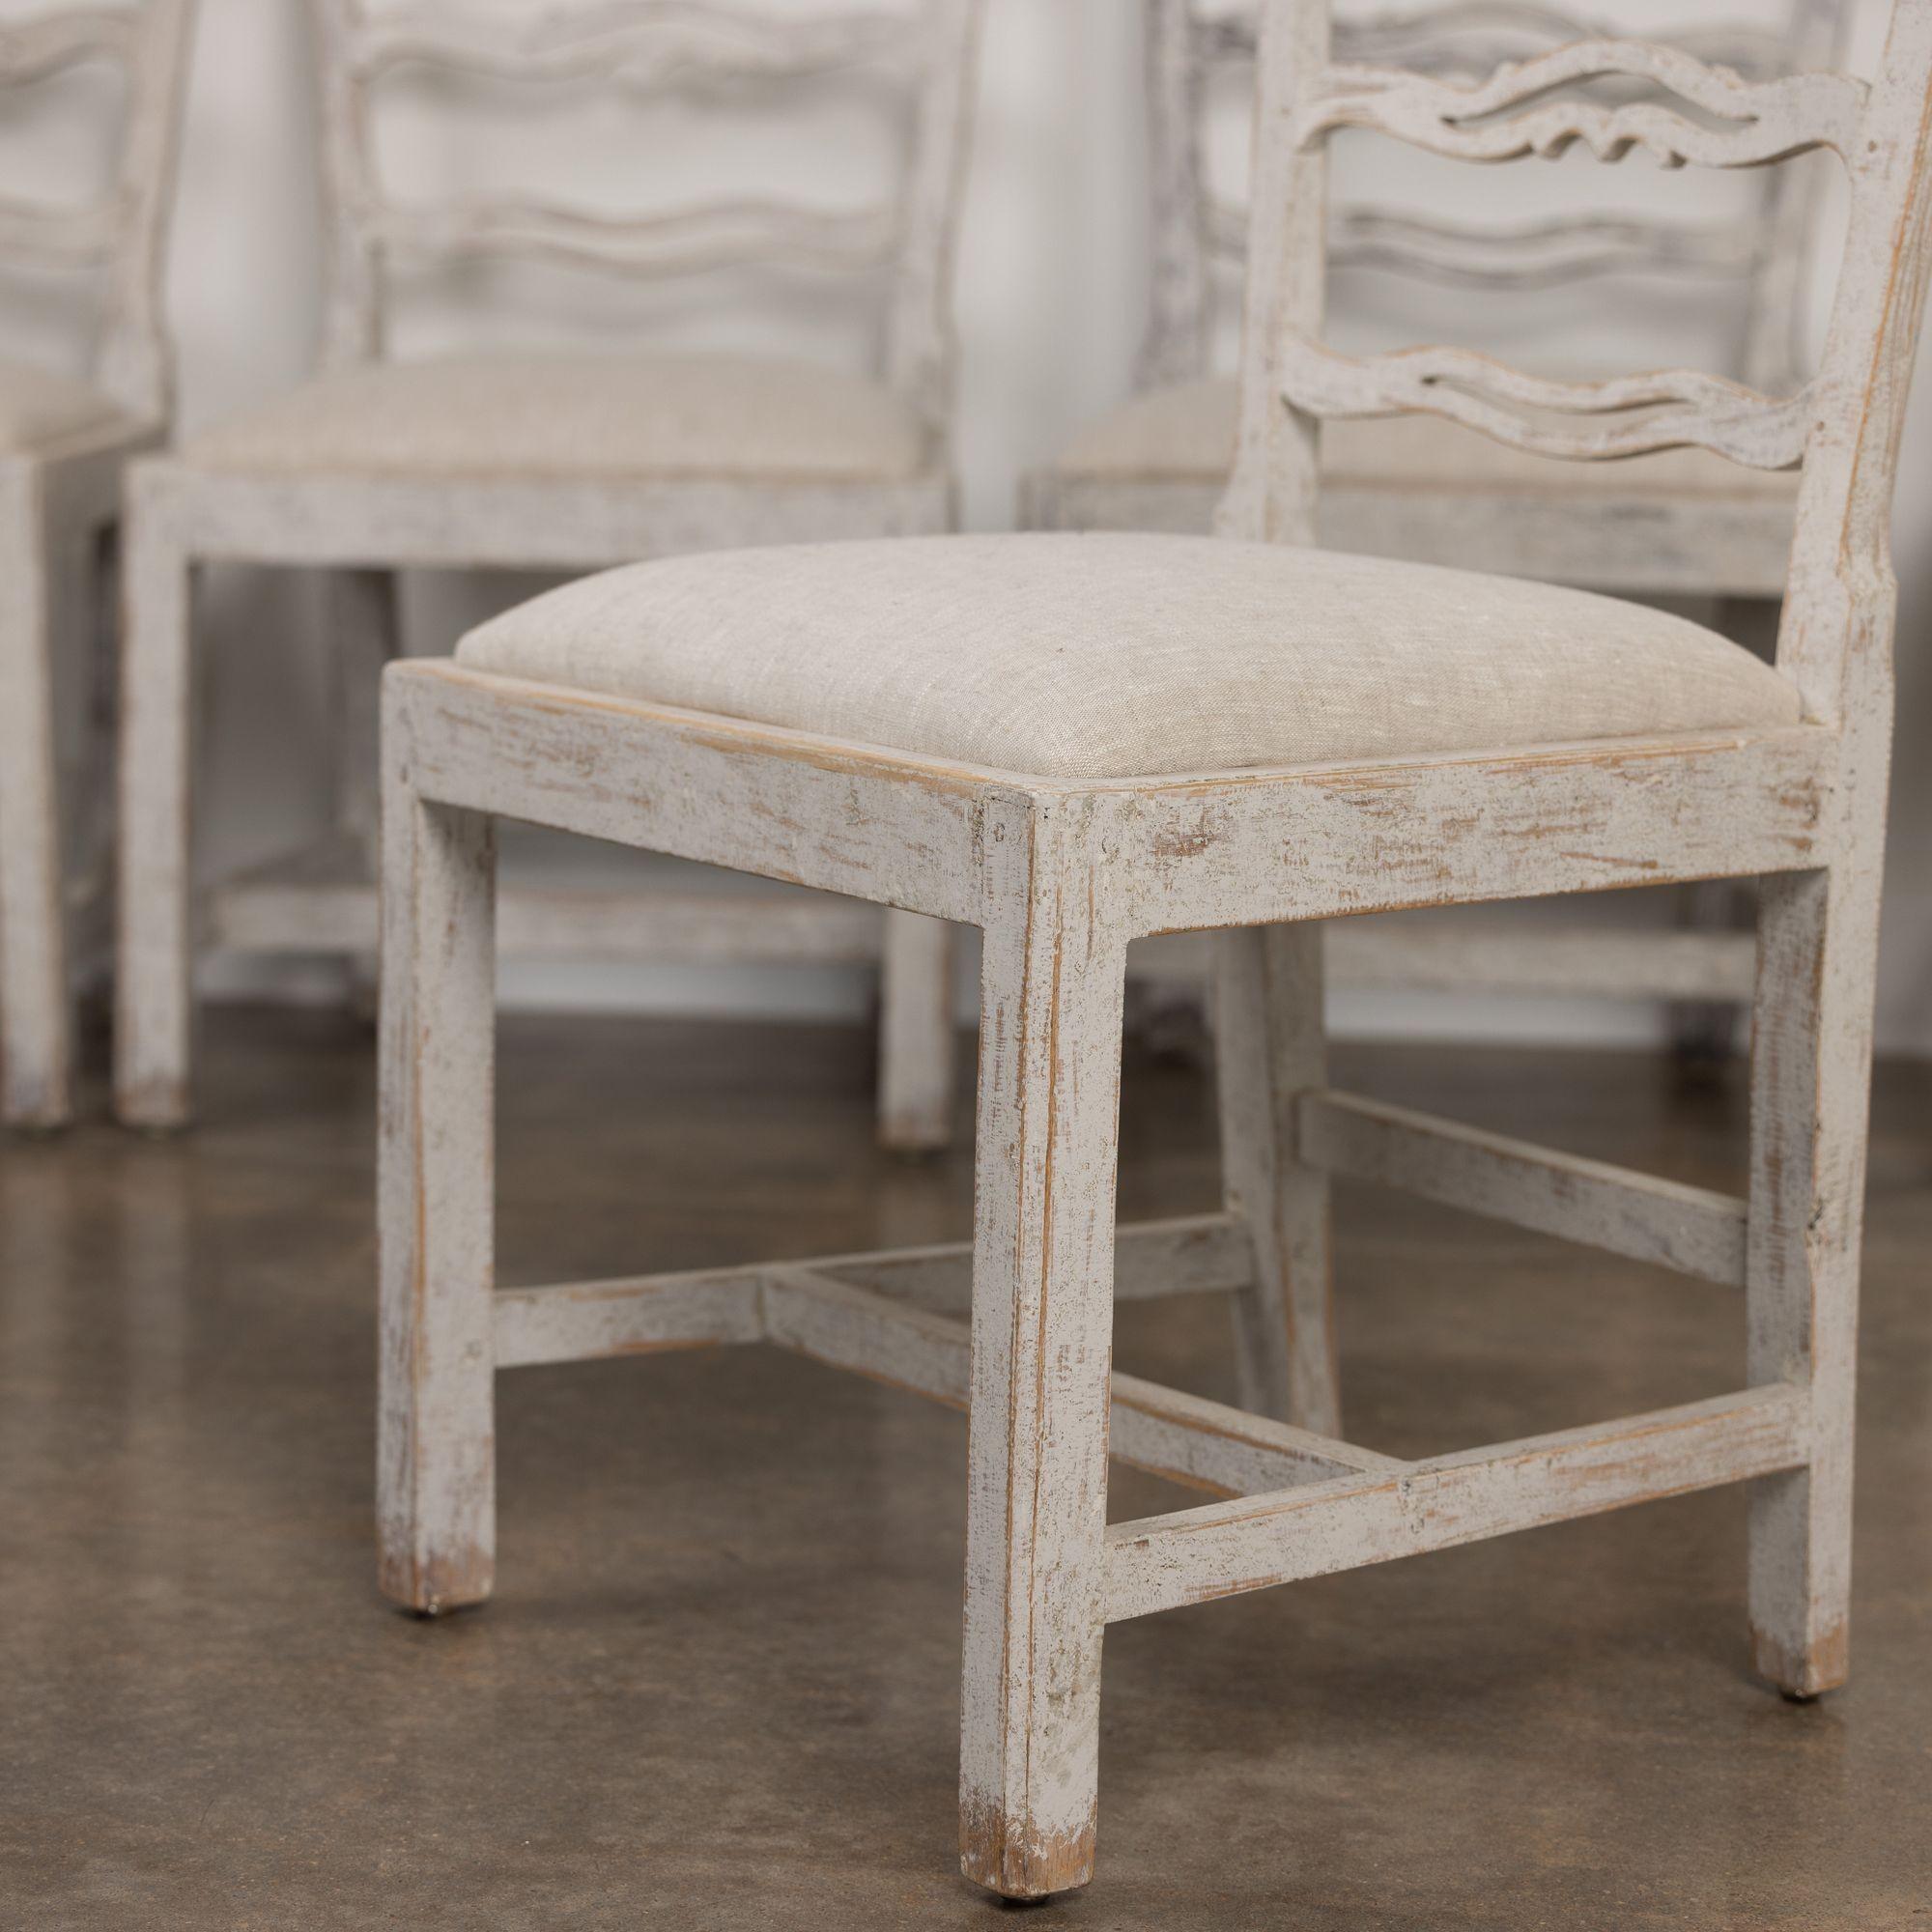 Set of Six Gustavian Period Painted Dining Chairs, 19th c. Swedish For Sale 4